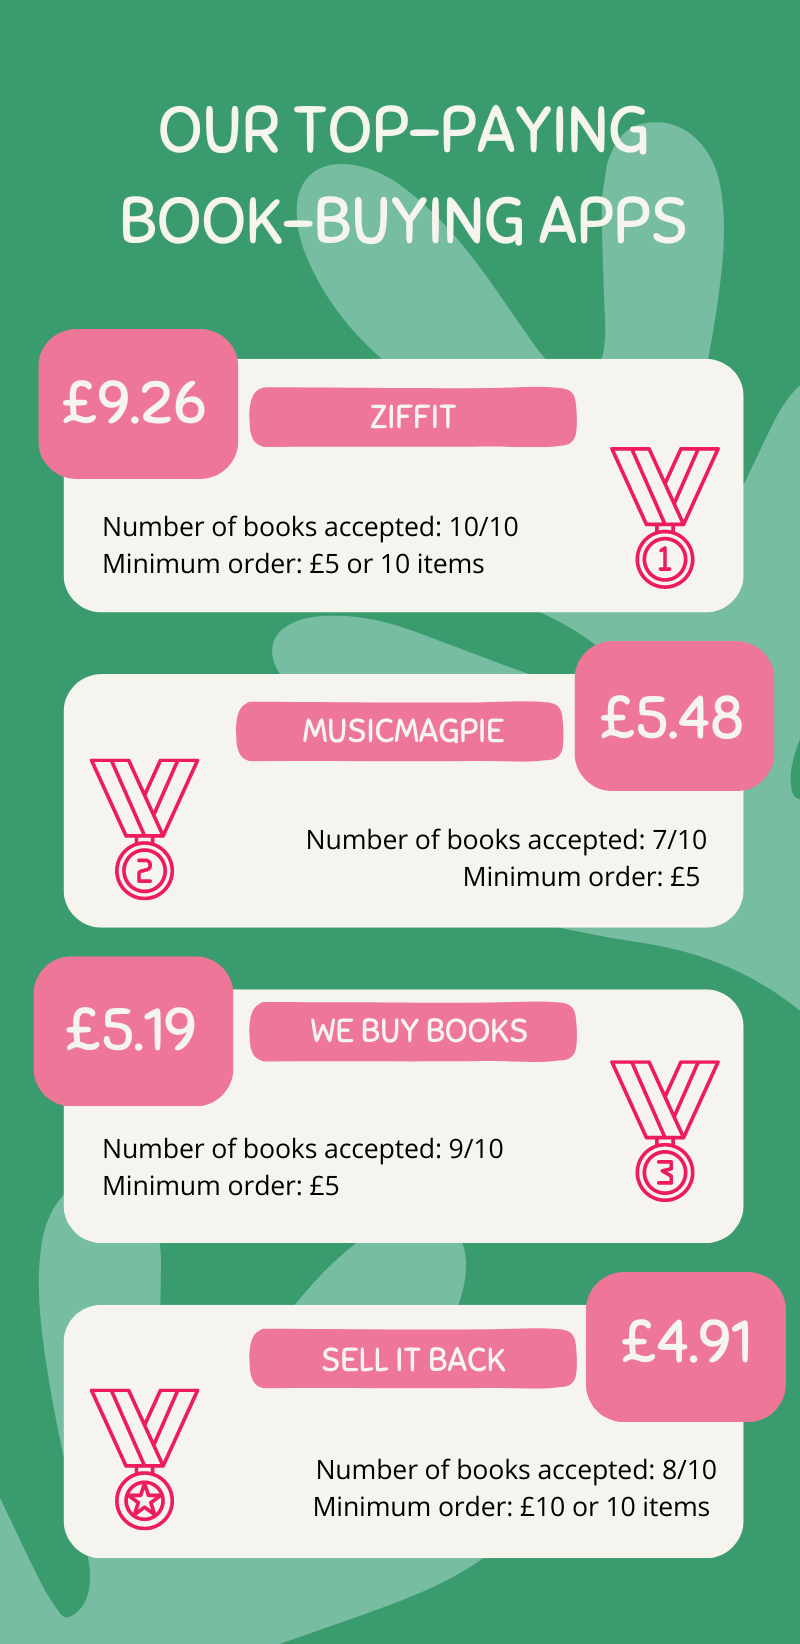 Top-paying book-buying apps TopCashback infographic